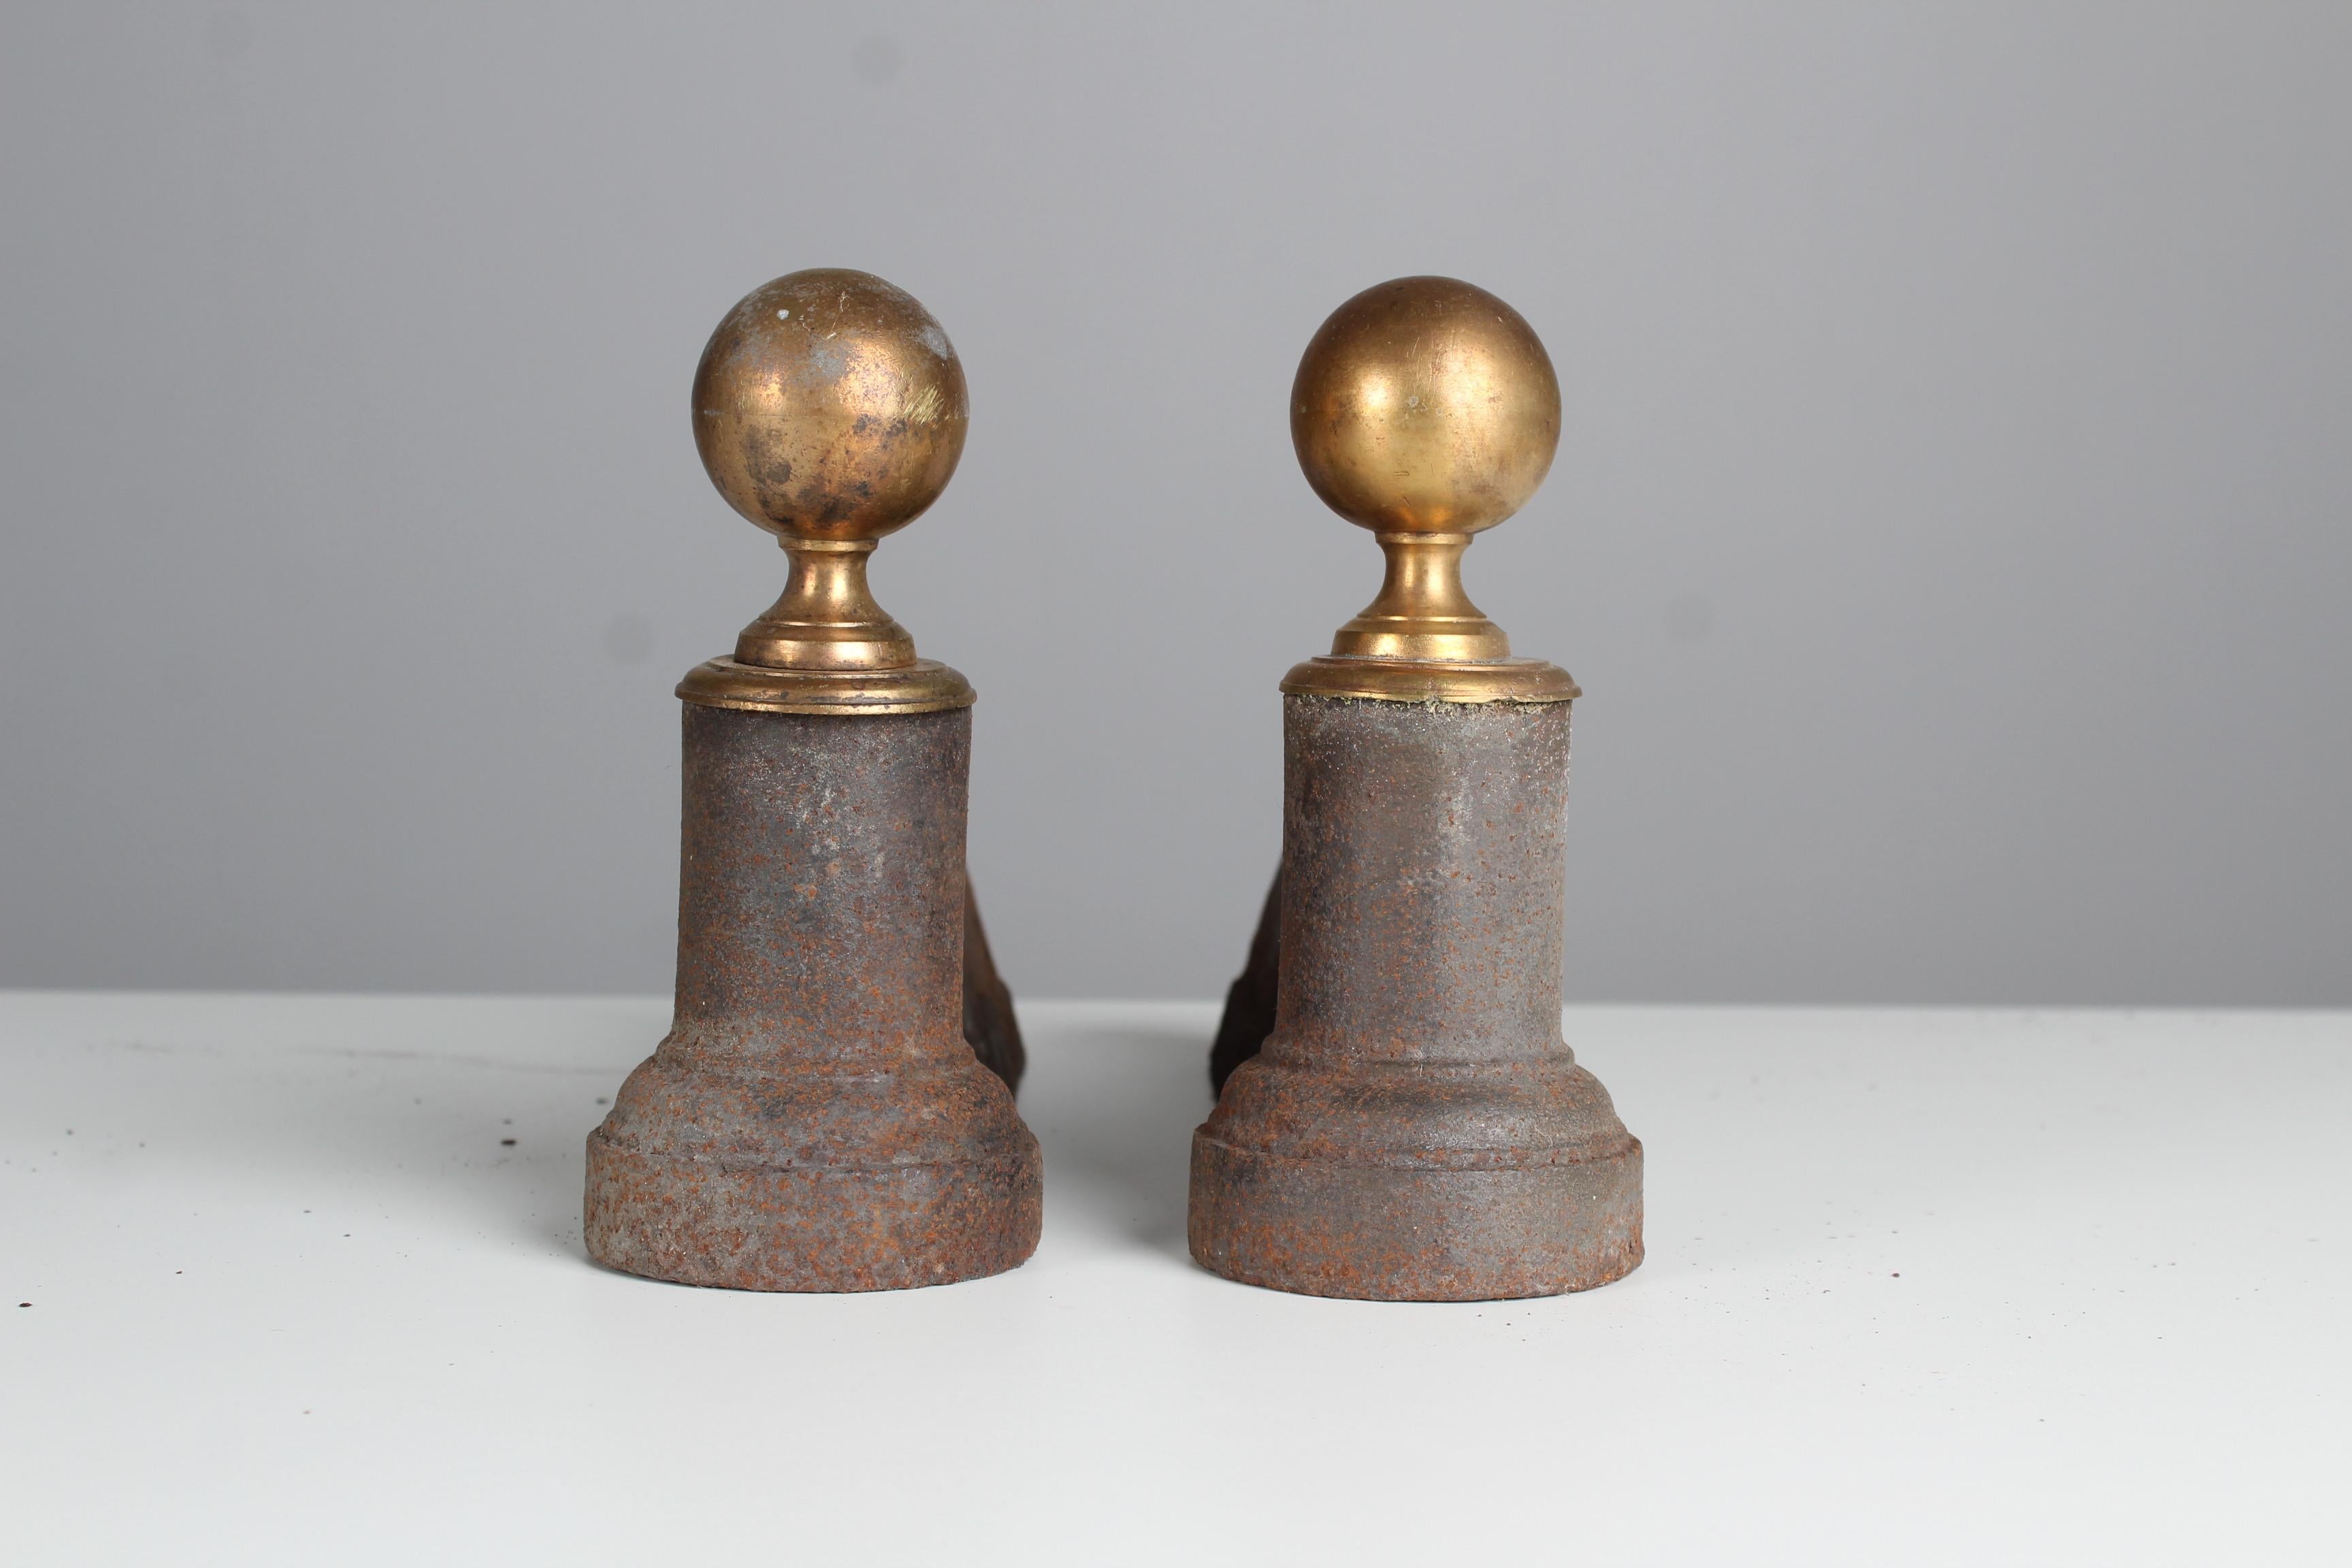 Pair of wonderful andirons with a brass globe decoration.
France, circa 1860.
Solid iron in good condition according to its age.

Firedogs are used as a holder for firewood in a fireplace. They are also known as a fire horse, andiron or chimney